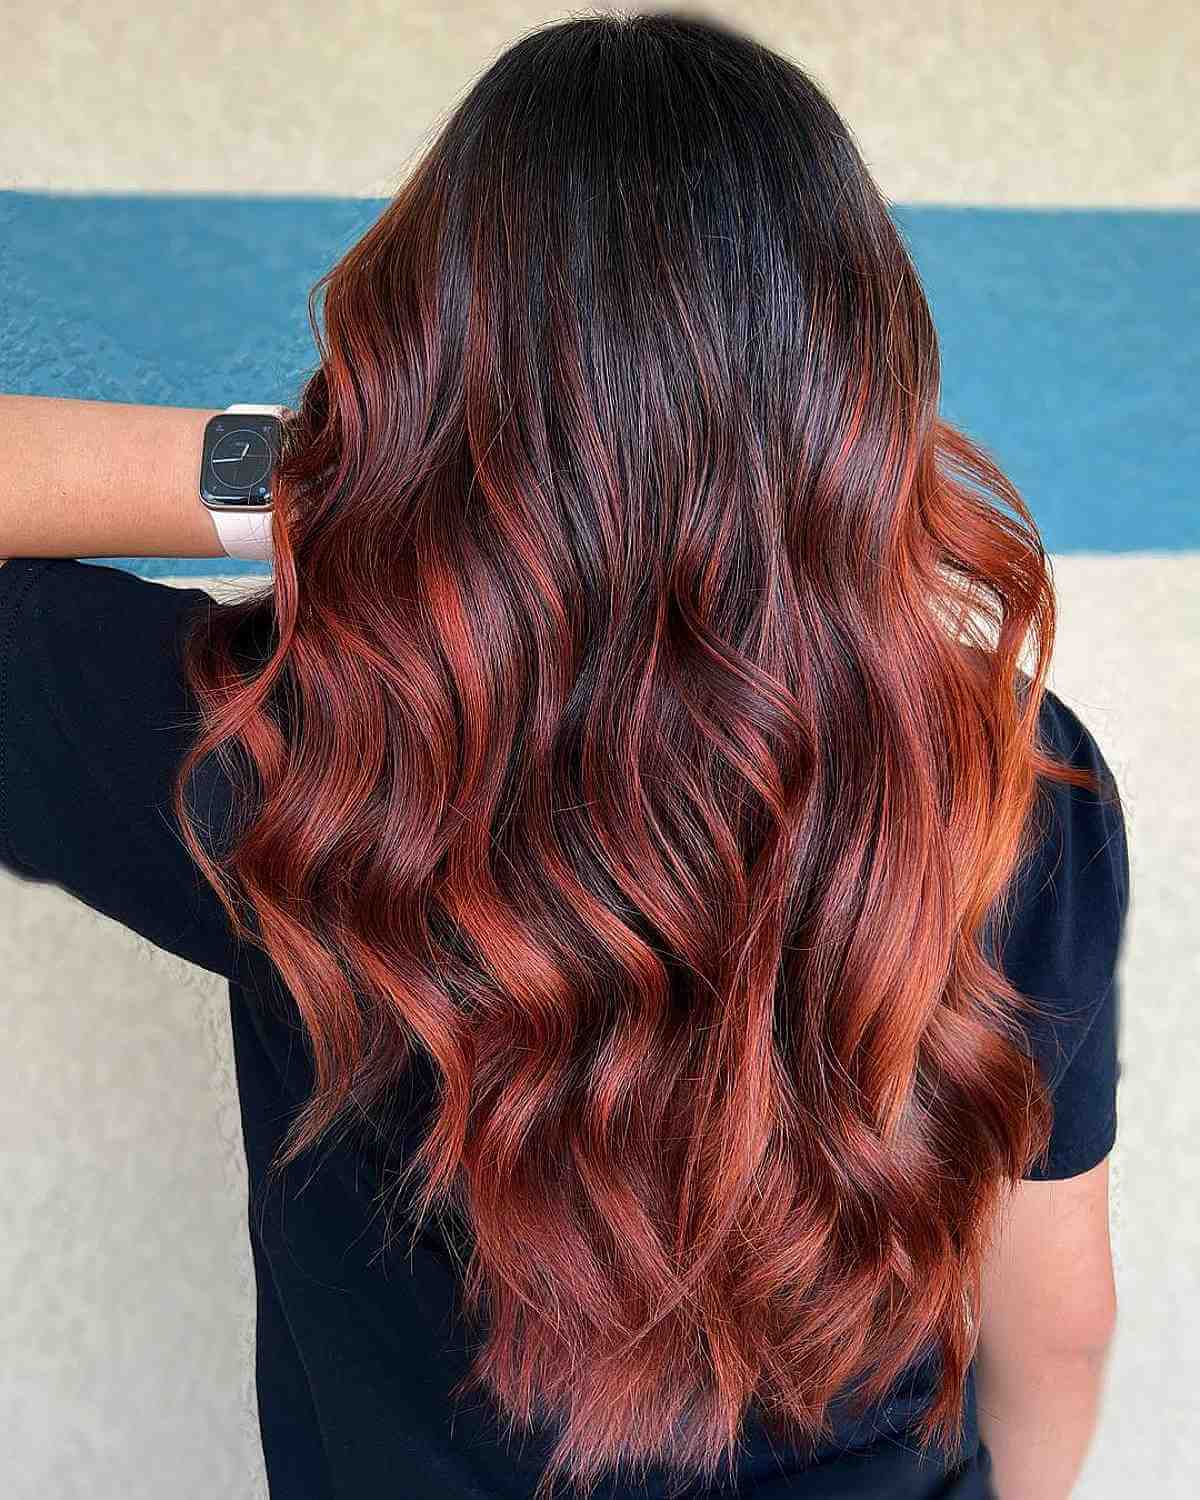 Red Balayage Hair Colors: 42 Hottest Examples for 2023